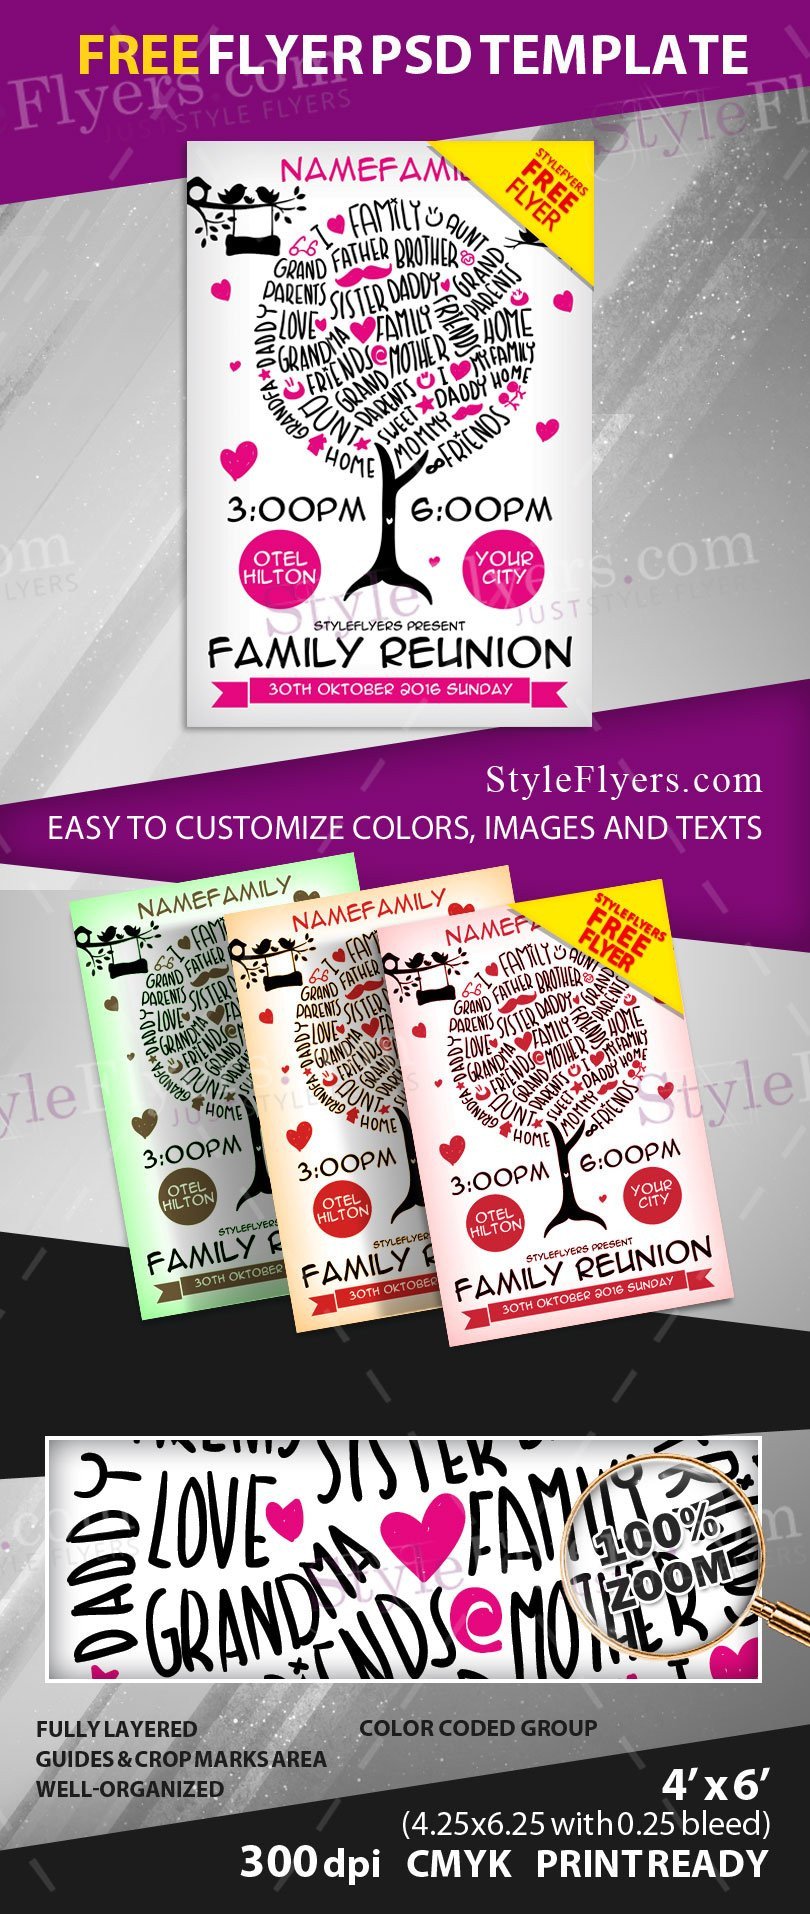 Family Reunion FREE PSD Flyer Template Free Download